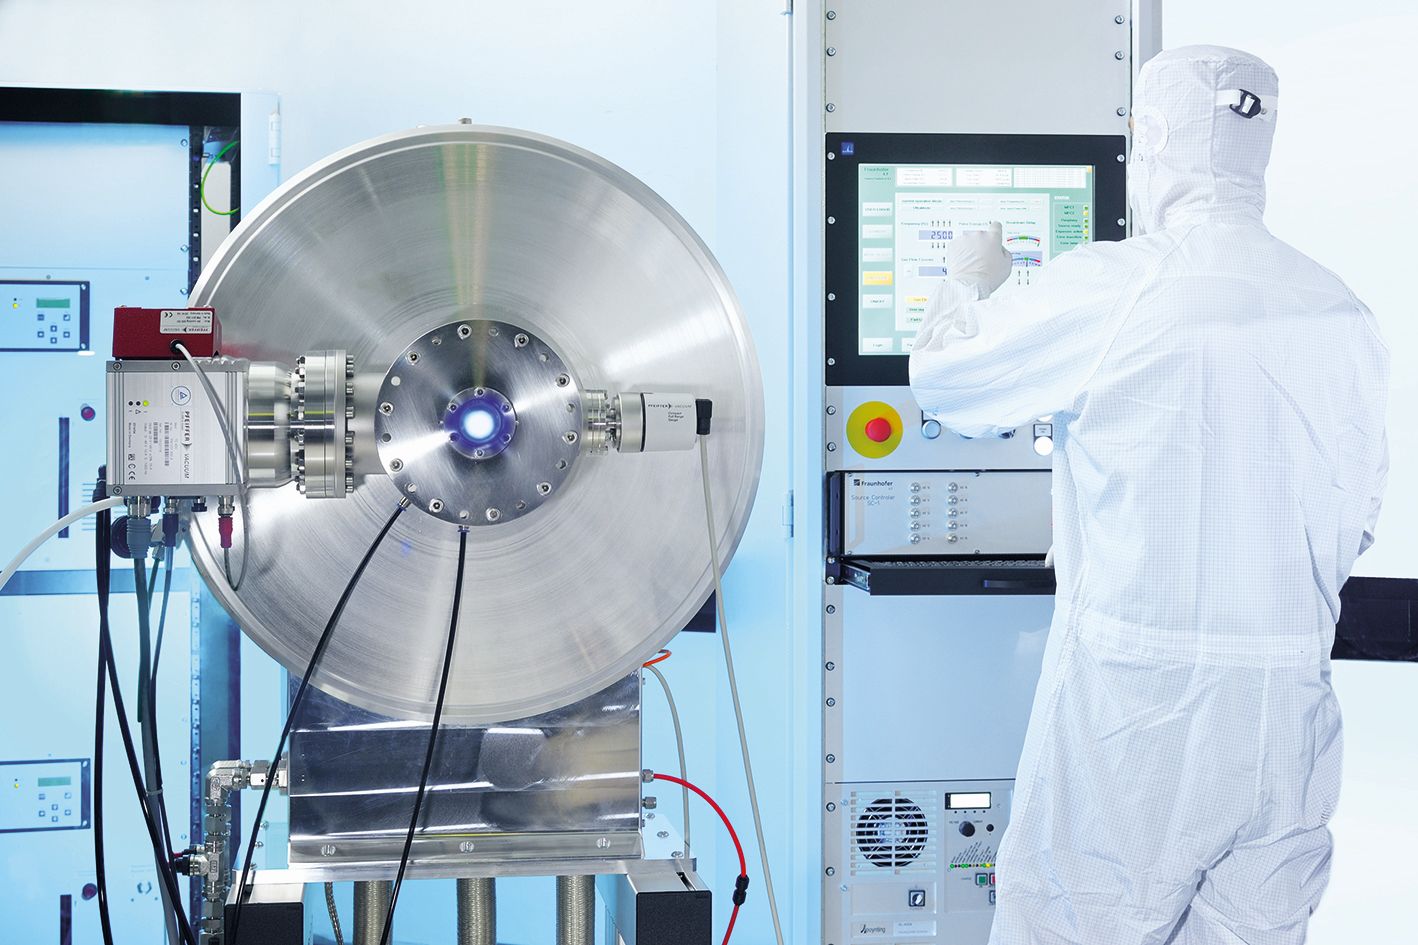 The EUV source at Fraunhofer ILT delivers 40 W at 13.5 nm  (+/- 1 percent bandwidth).